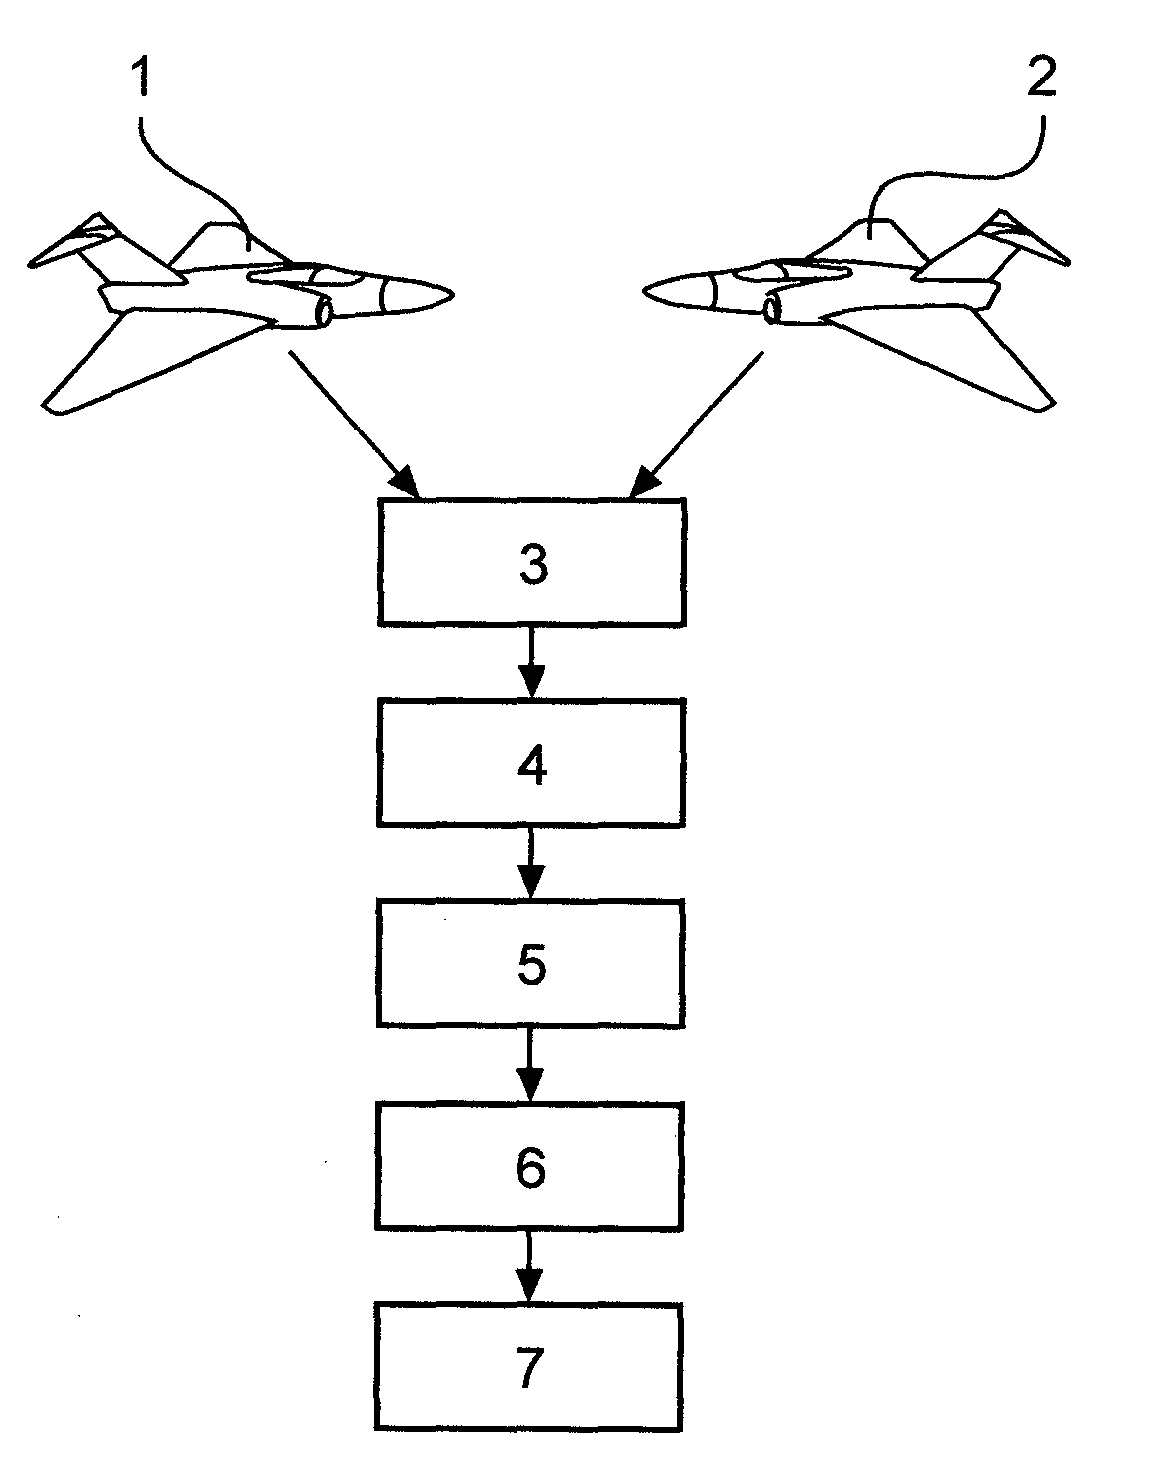 Method for duel handling in a combat aircraft